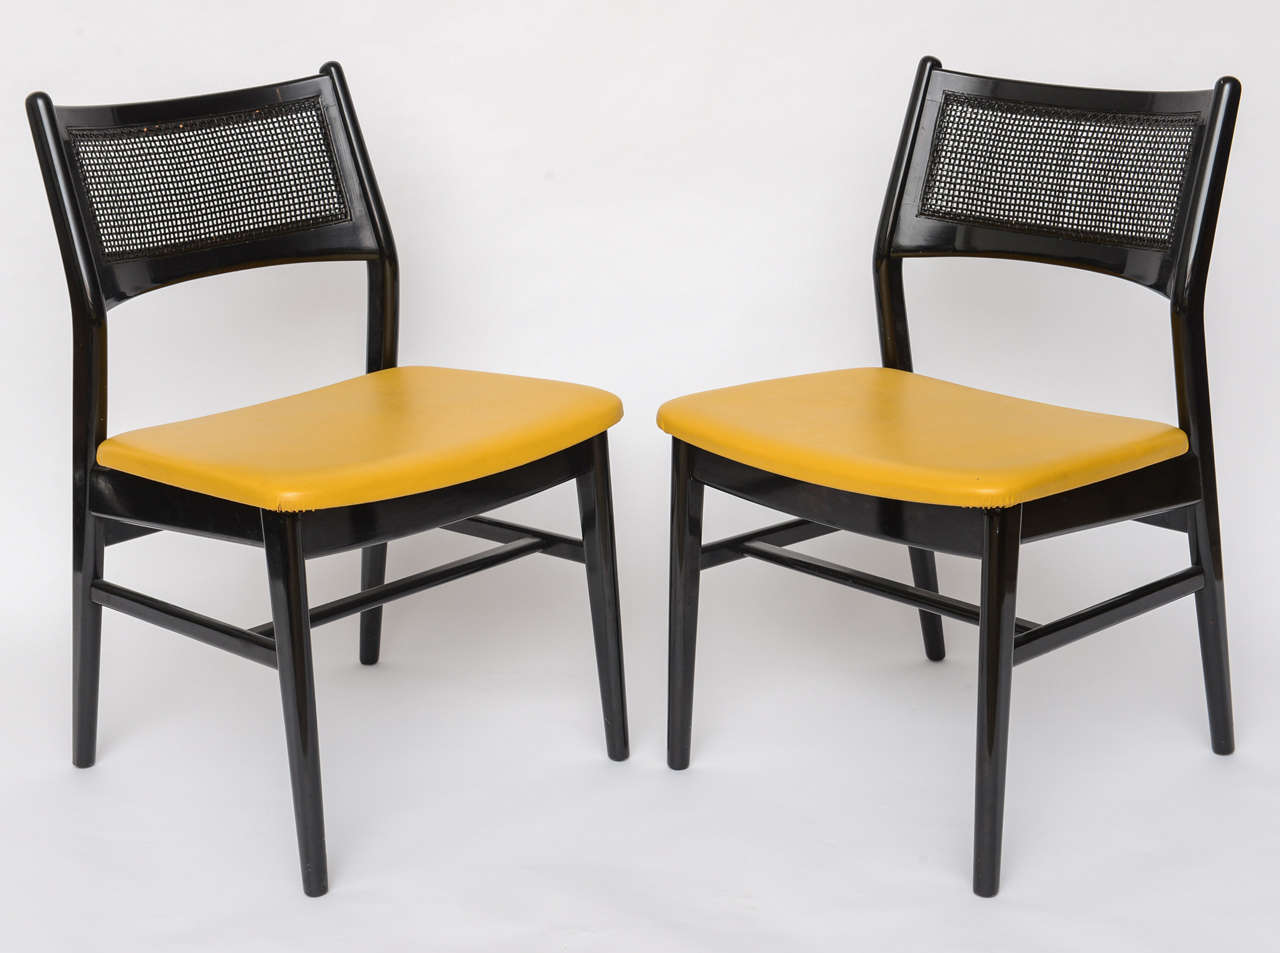 Beautiful black lacquer and cane dining room chairs by DUX.